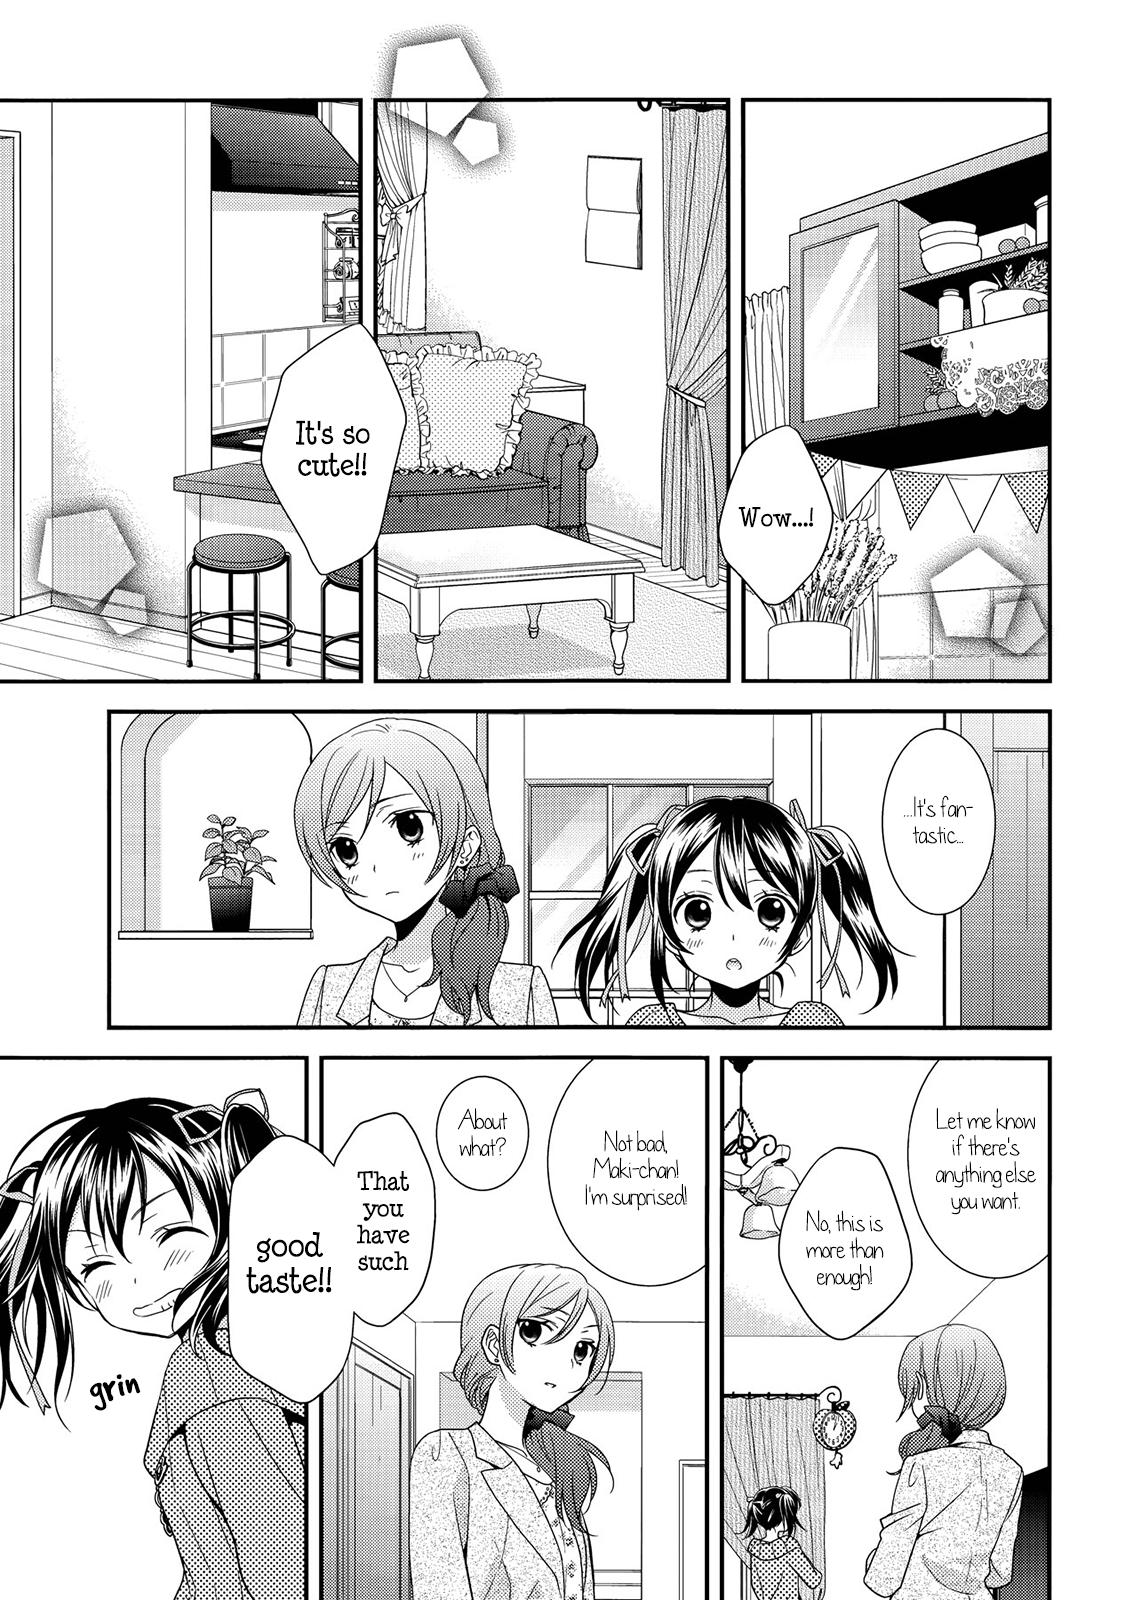 Jerkoff Honeymoon Baby - Love live Office Sex - Page 8